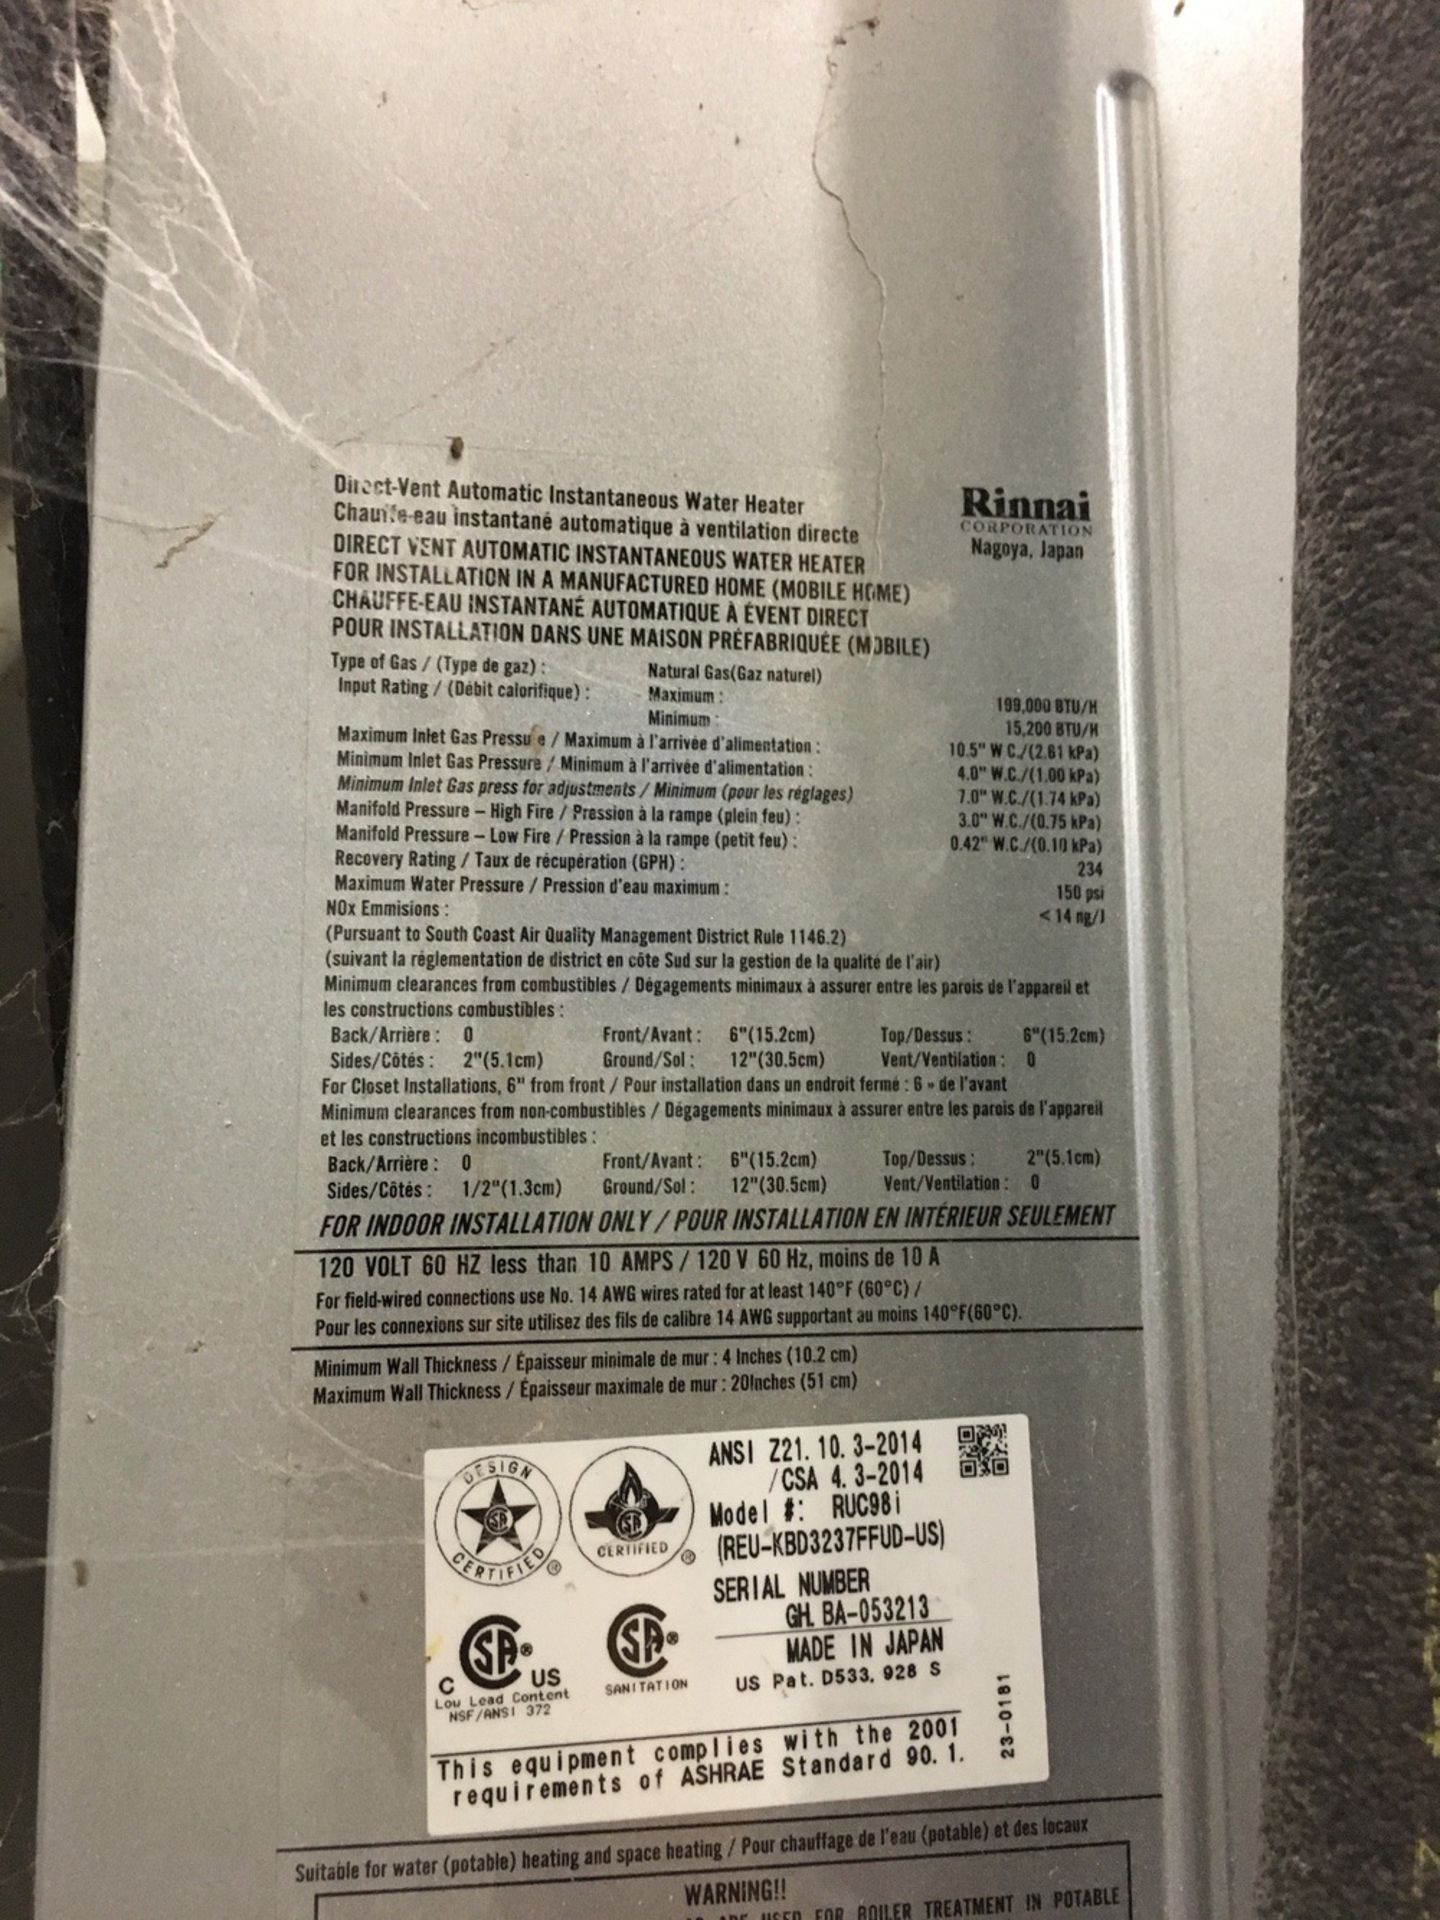 2016 Rinnai Model RUC98i Direct Vent Automatic Instantaneous Water Heater, Natural | Rig Fee: $200 - Image 4 of 4